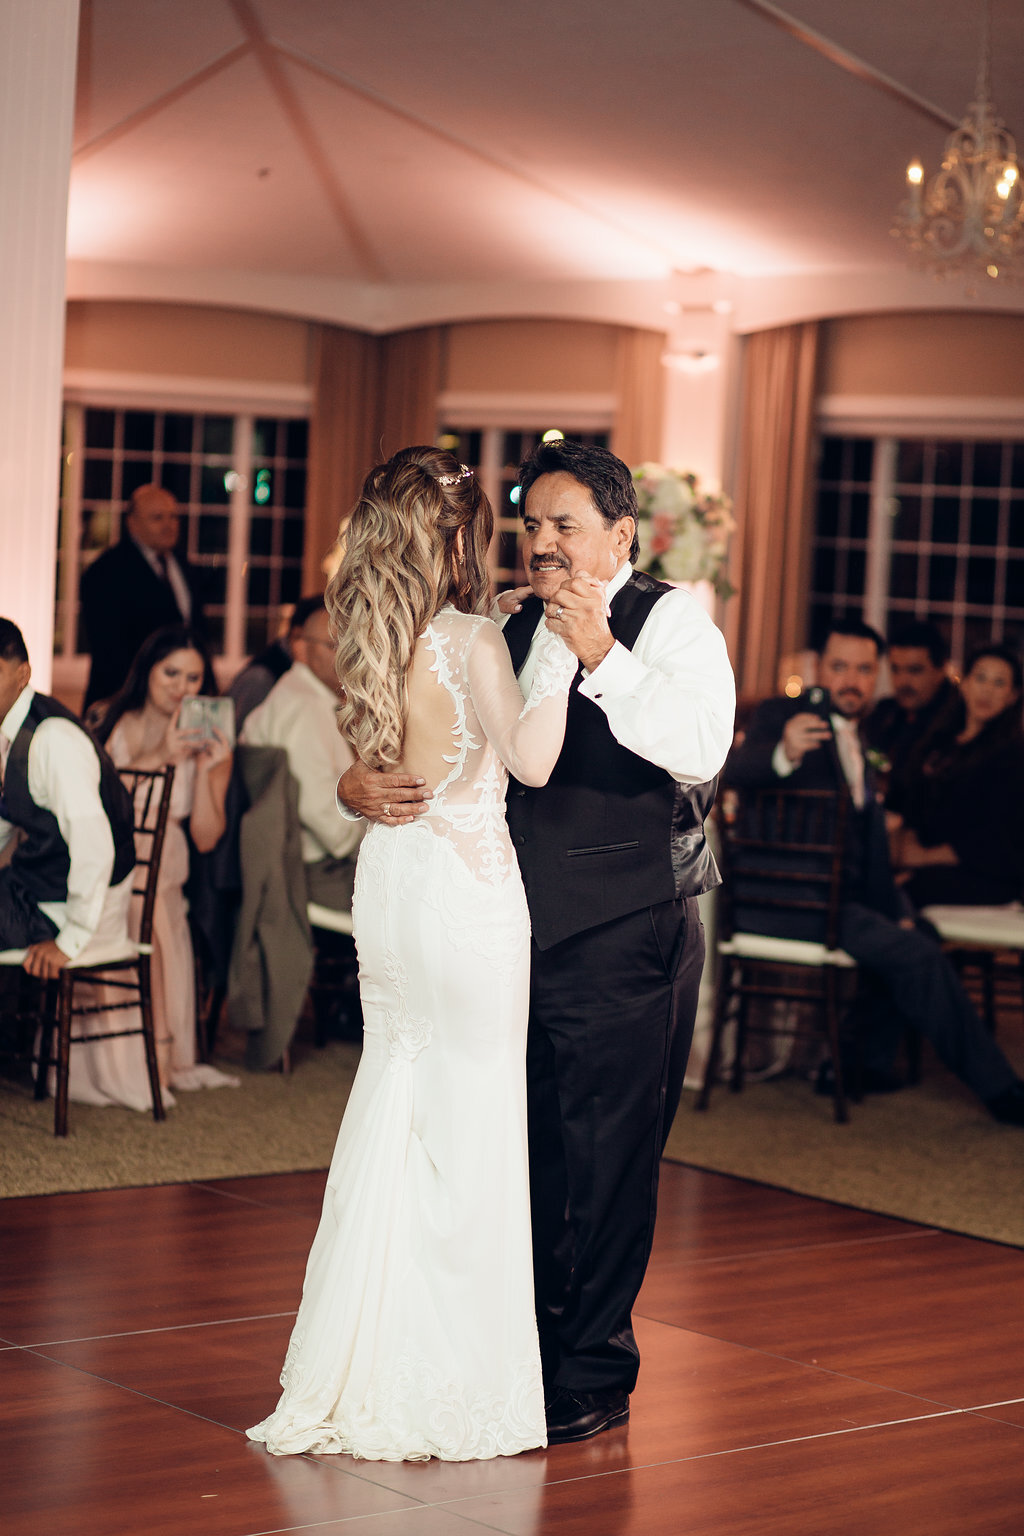 Wedding Photograph Of Visitors Looking At The Bride And Man In Black Suit Dancing Los Angeles